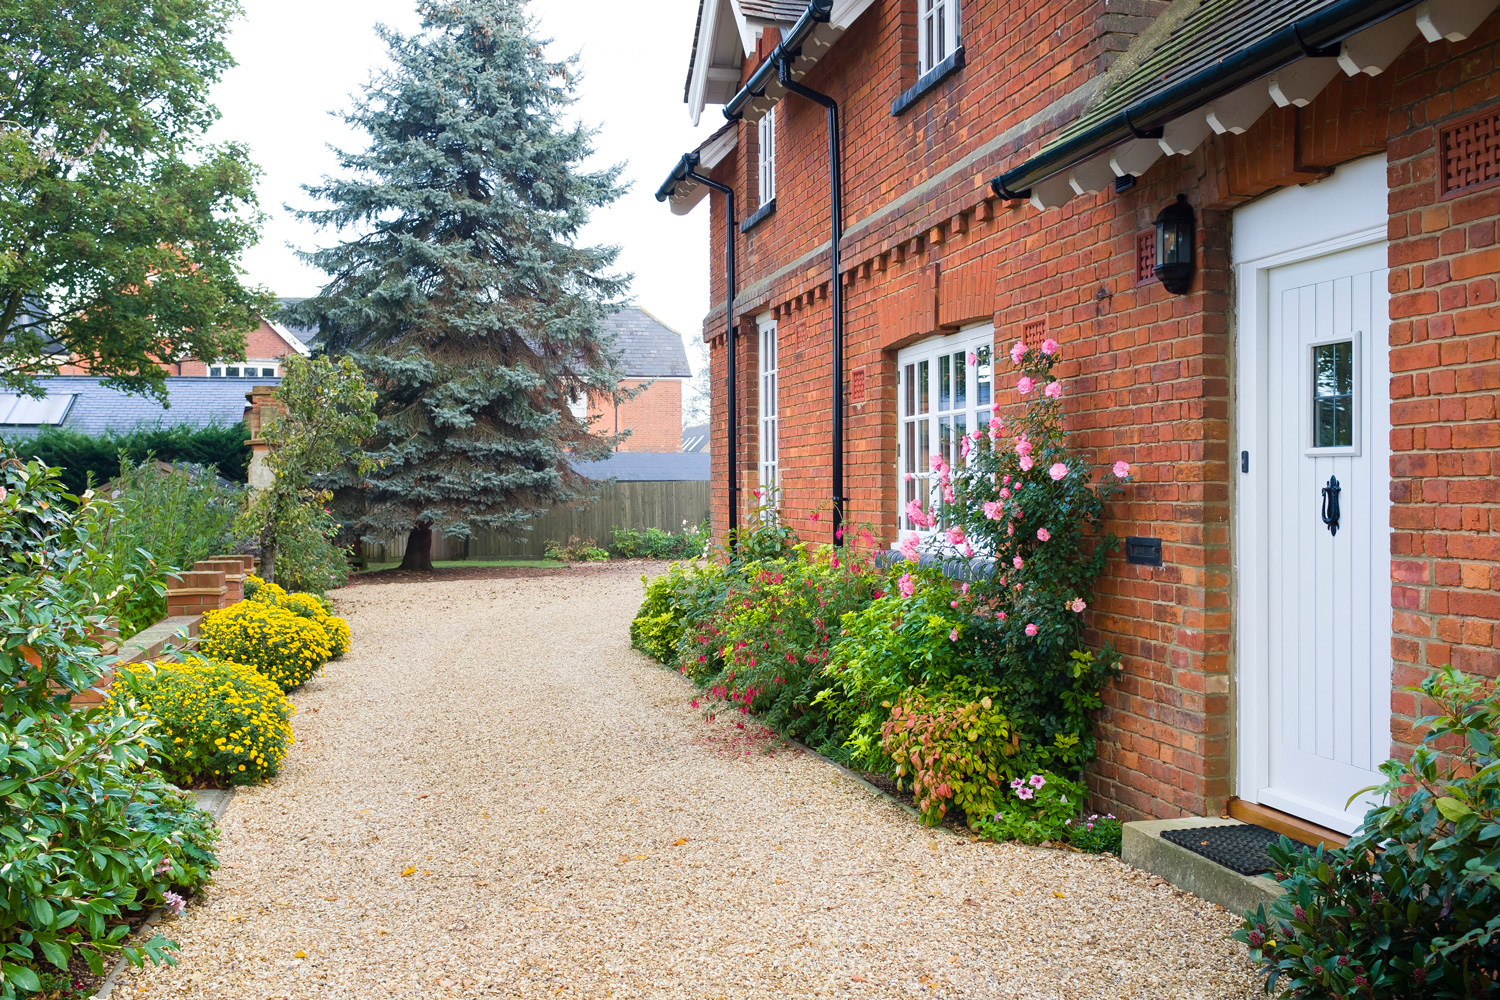 English country house and garden in Autumn with a gravel driveway.